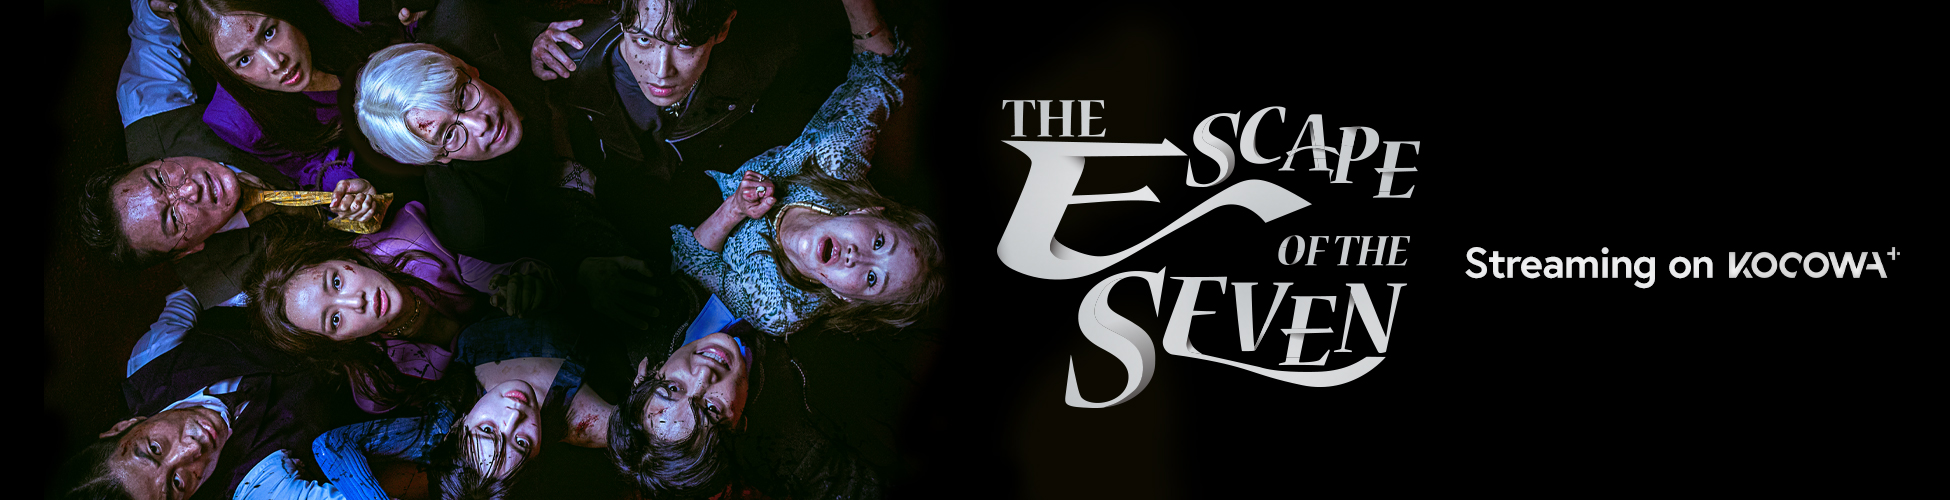 Stream The Escape of the Seven Now on KOCOWA